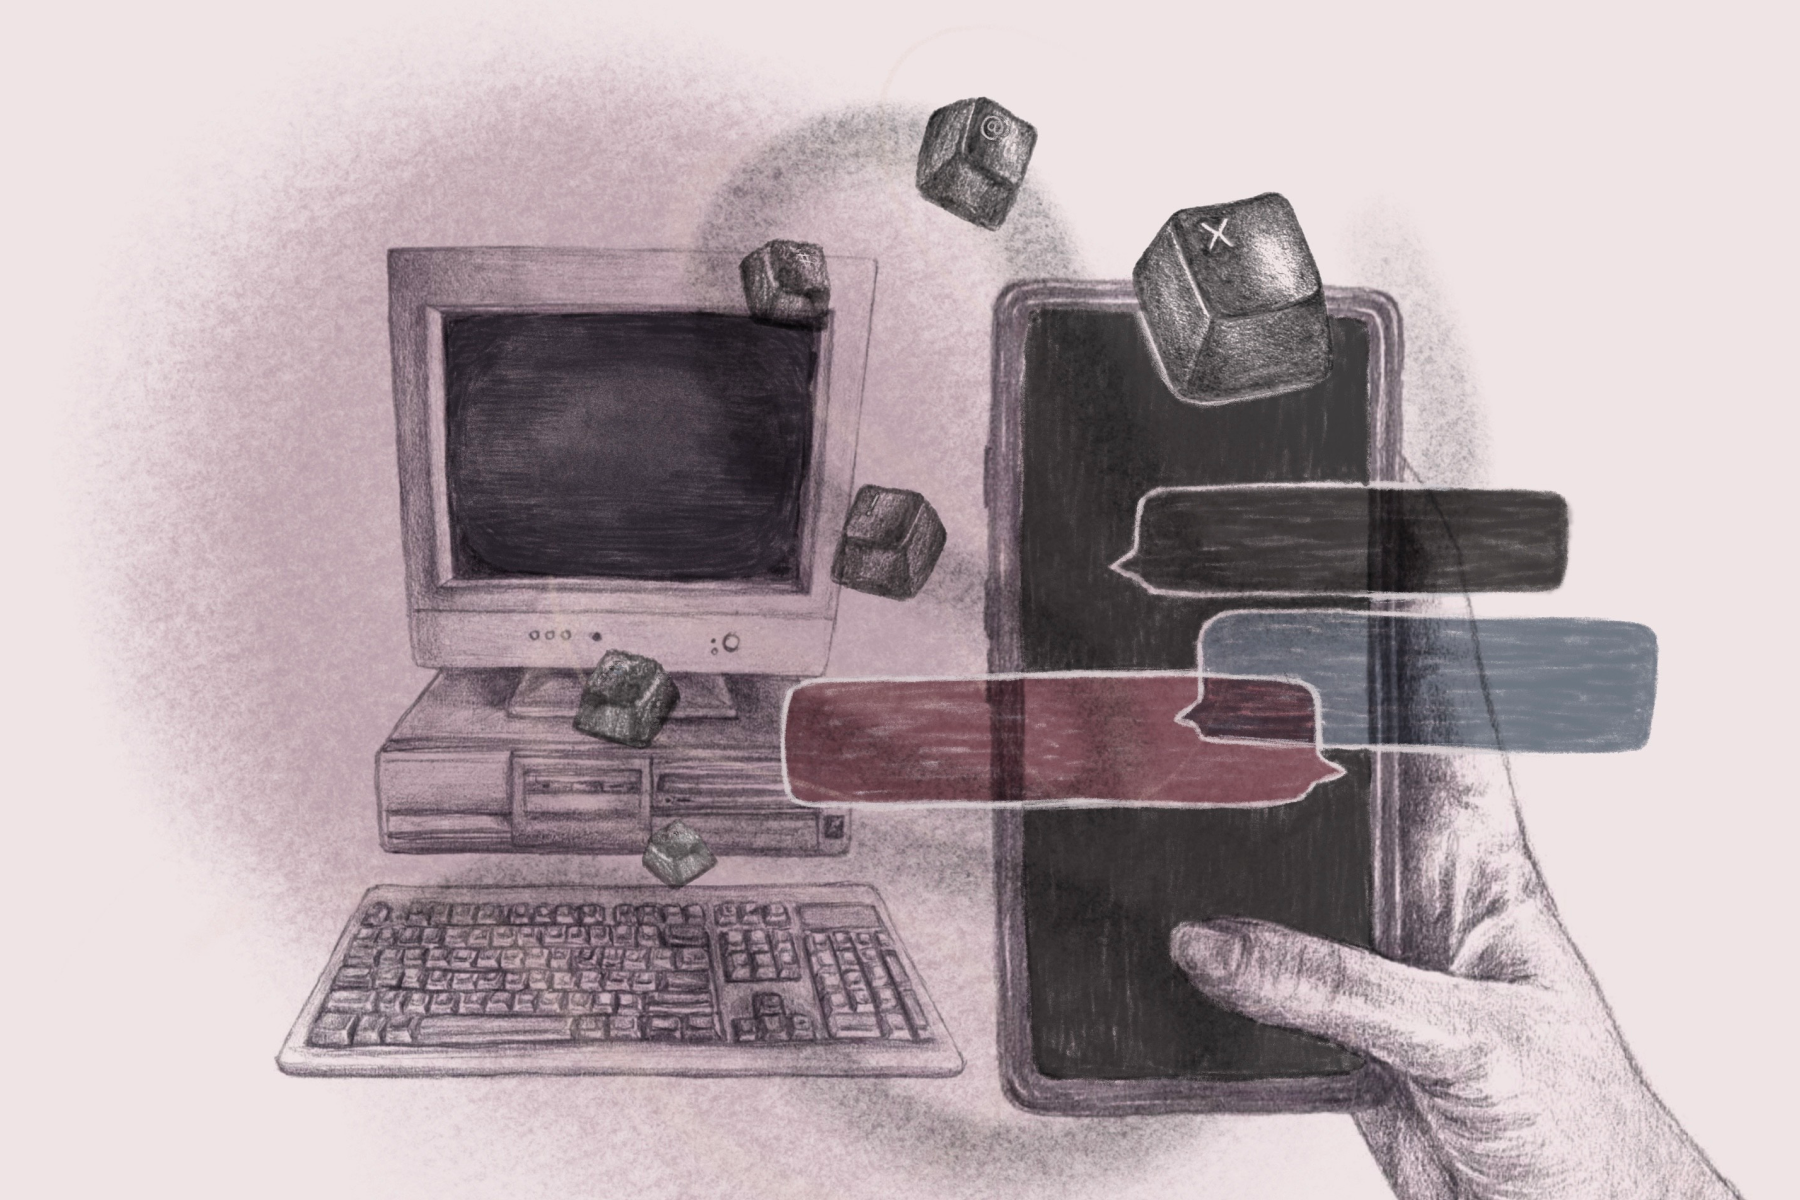 An illustration fo an old school Macintosh computer in the background with a hand holding a phone with chat bubbles. Computer keys float in the foreground.